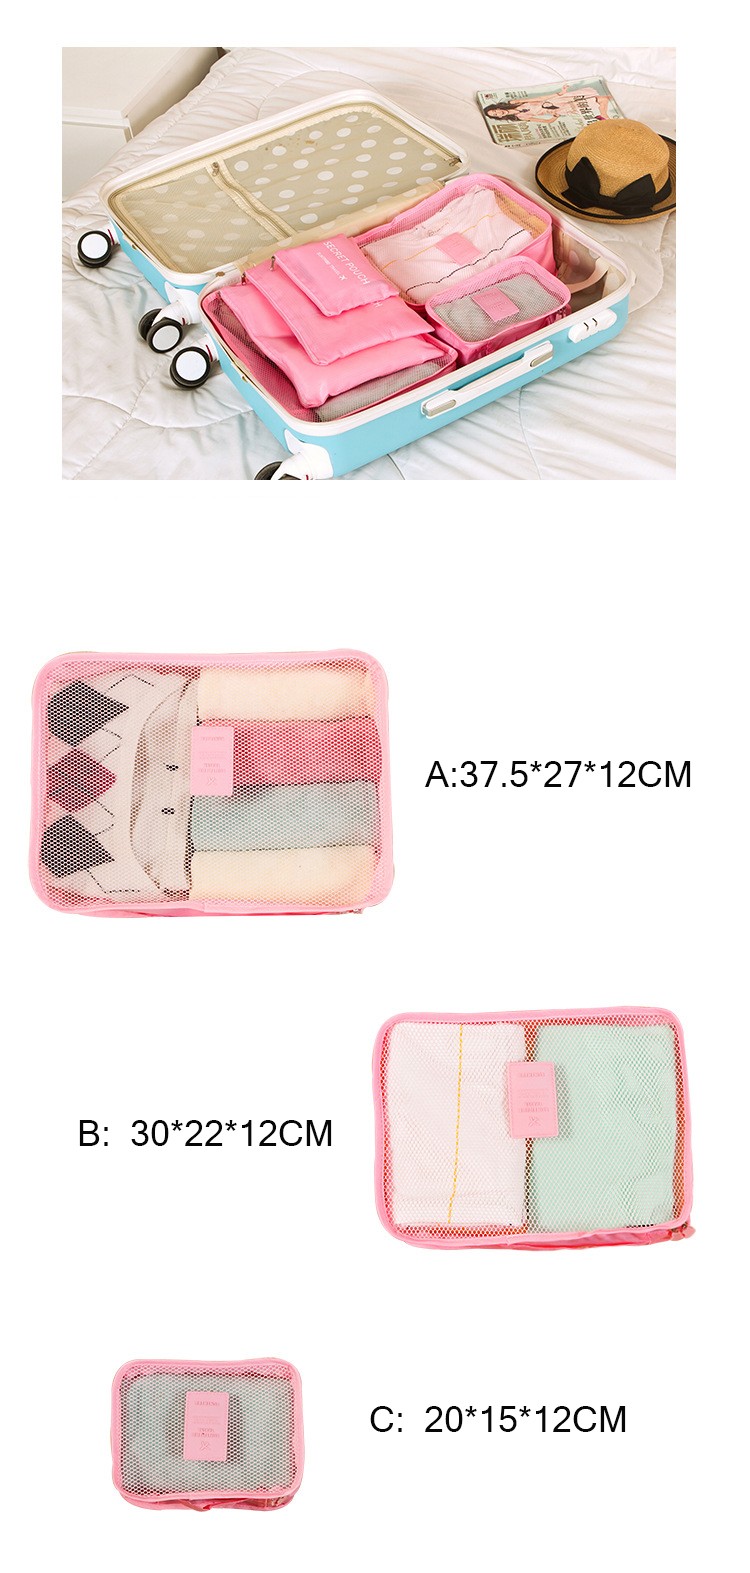 6pcs-In-One-Set-travel-Bag-Cosmetic-Toiletry-Makeup-Bags-And-Cases-Kosmetiktasche-Organisateur-De-Sa-32674056905